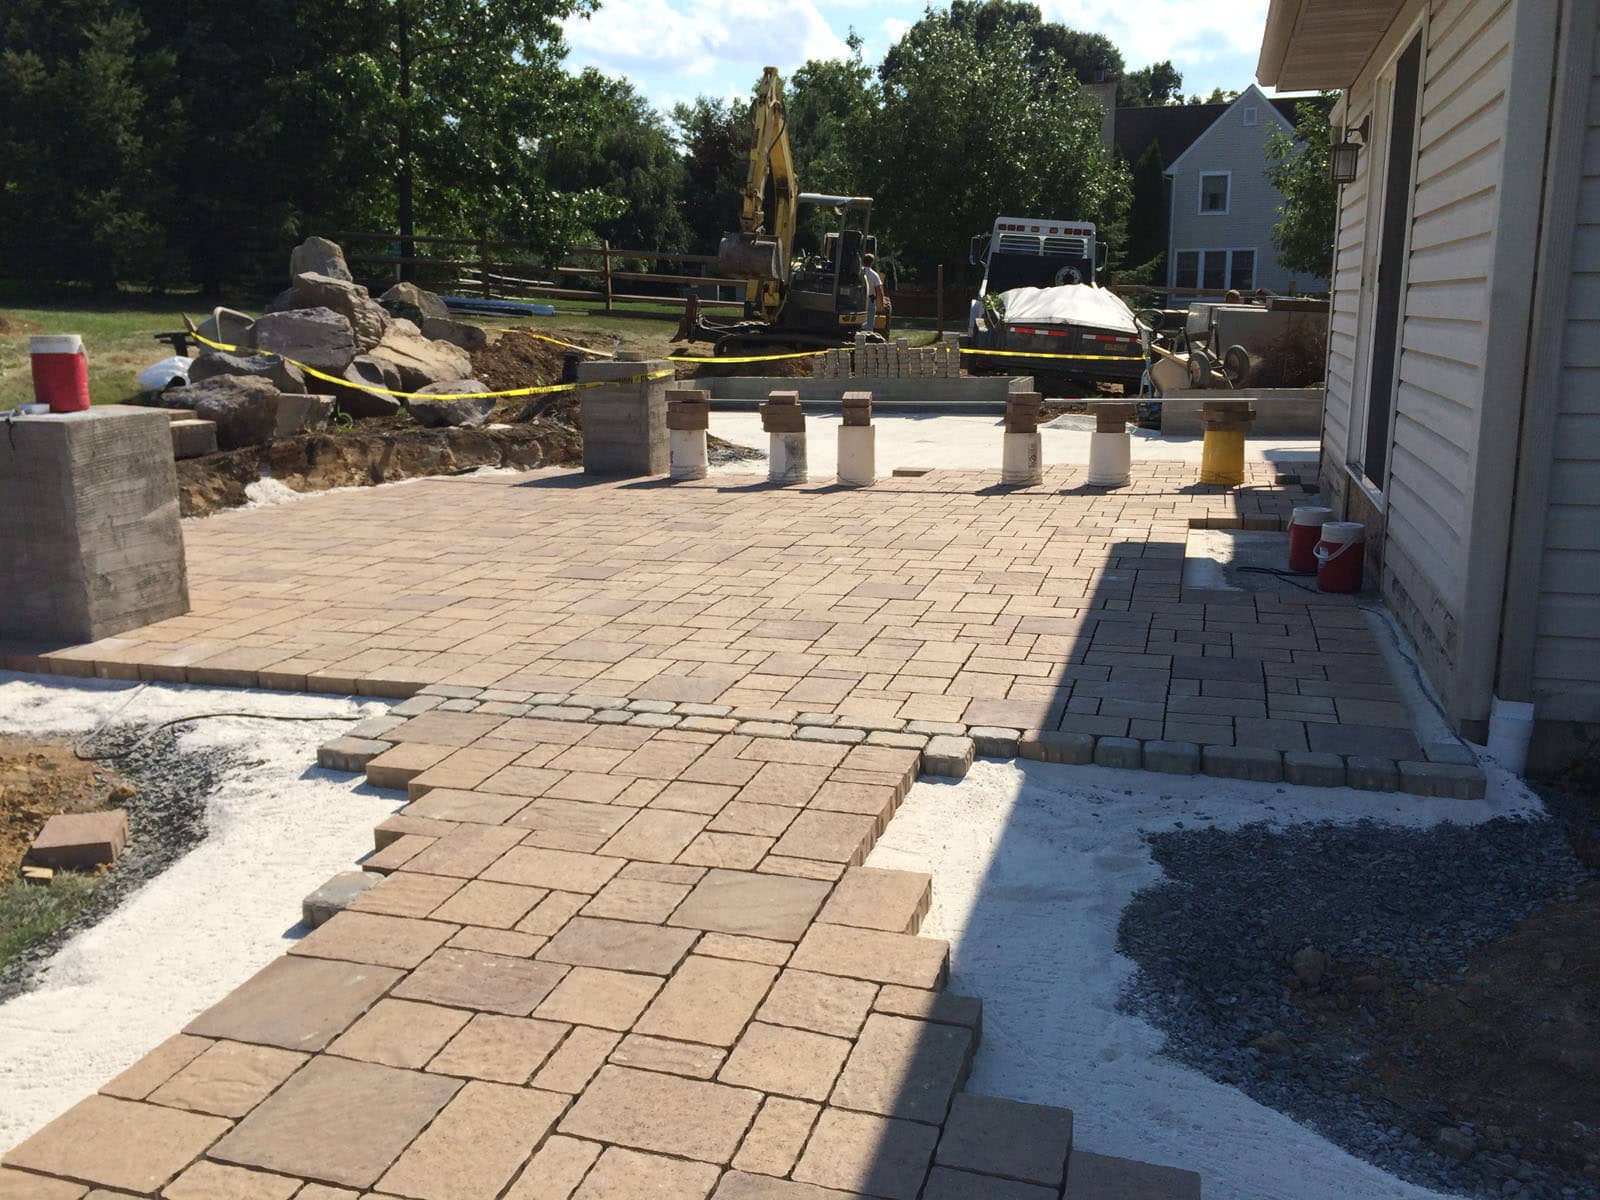 When we started to install the low maintenance paver patio, the homeowners were ecstatic over the gained square footage!